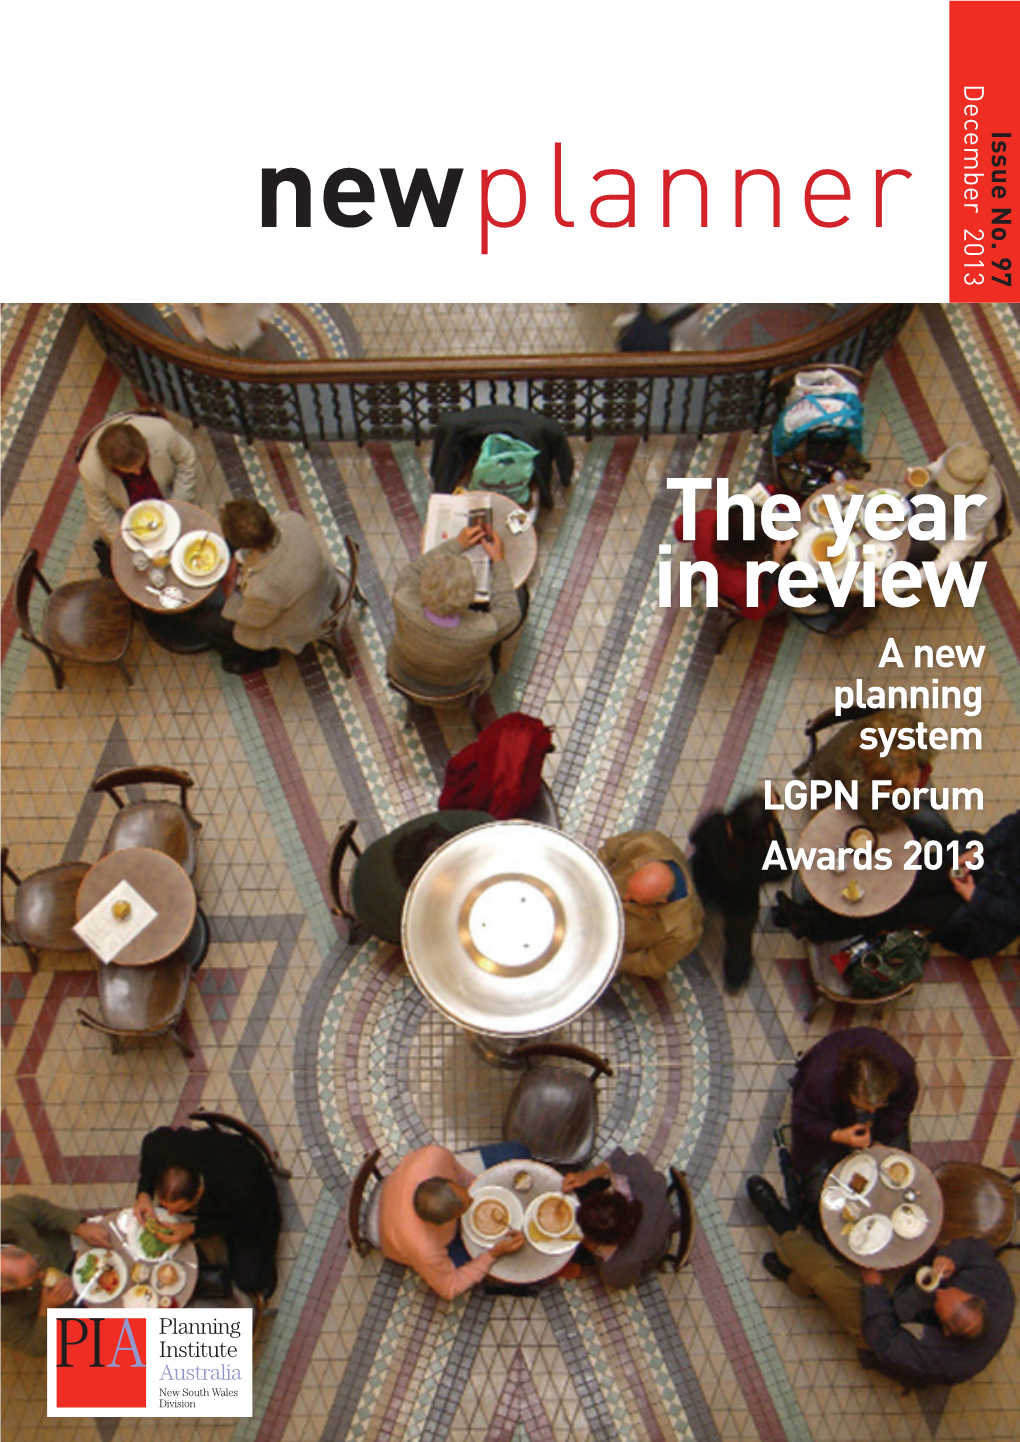 The Year in Review a New Planning System LGPN Forum Awards 2013 Planning Institute of Australia